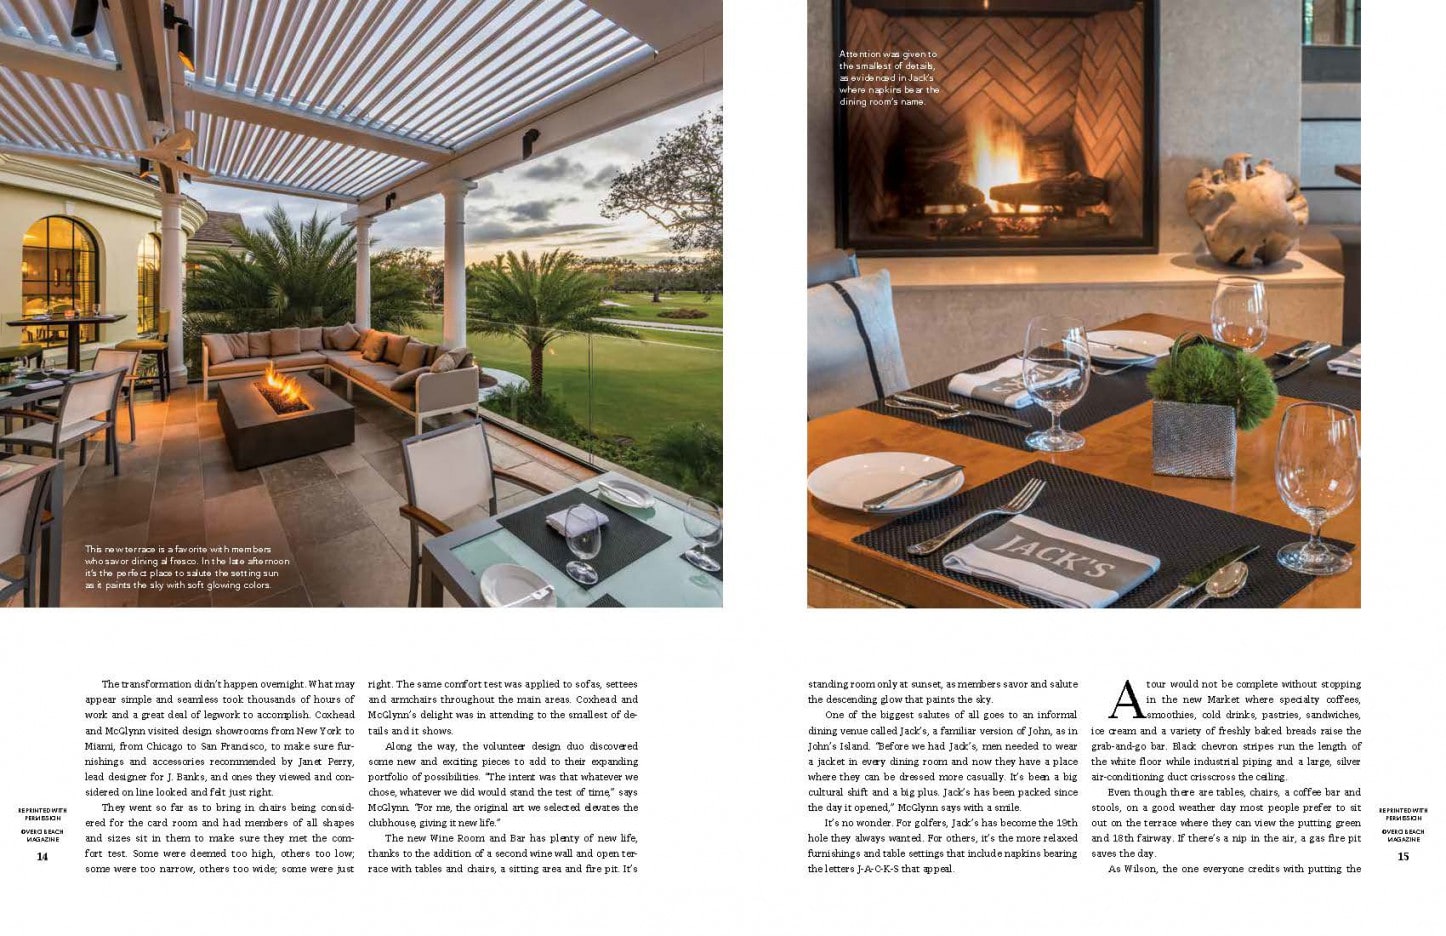 johns island club dining with interiors by j banks design group is featured in this magazine